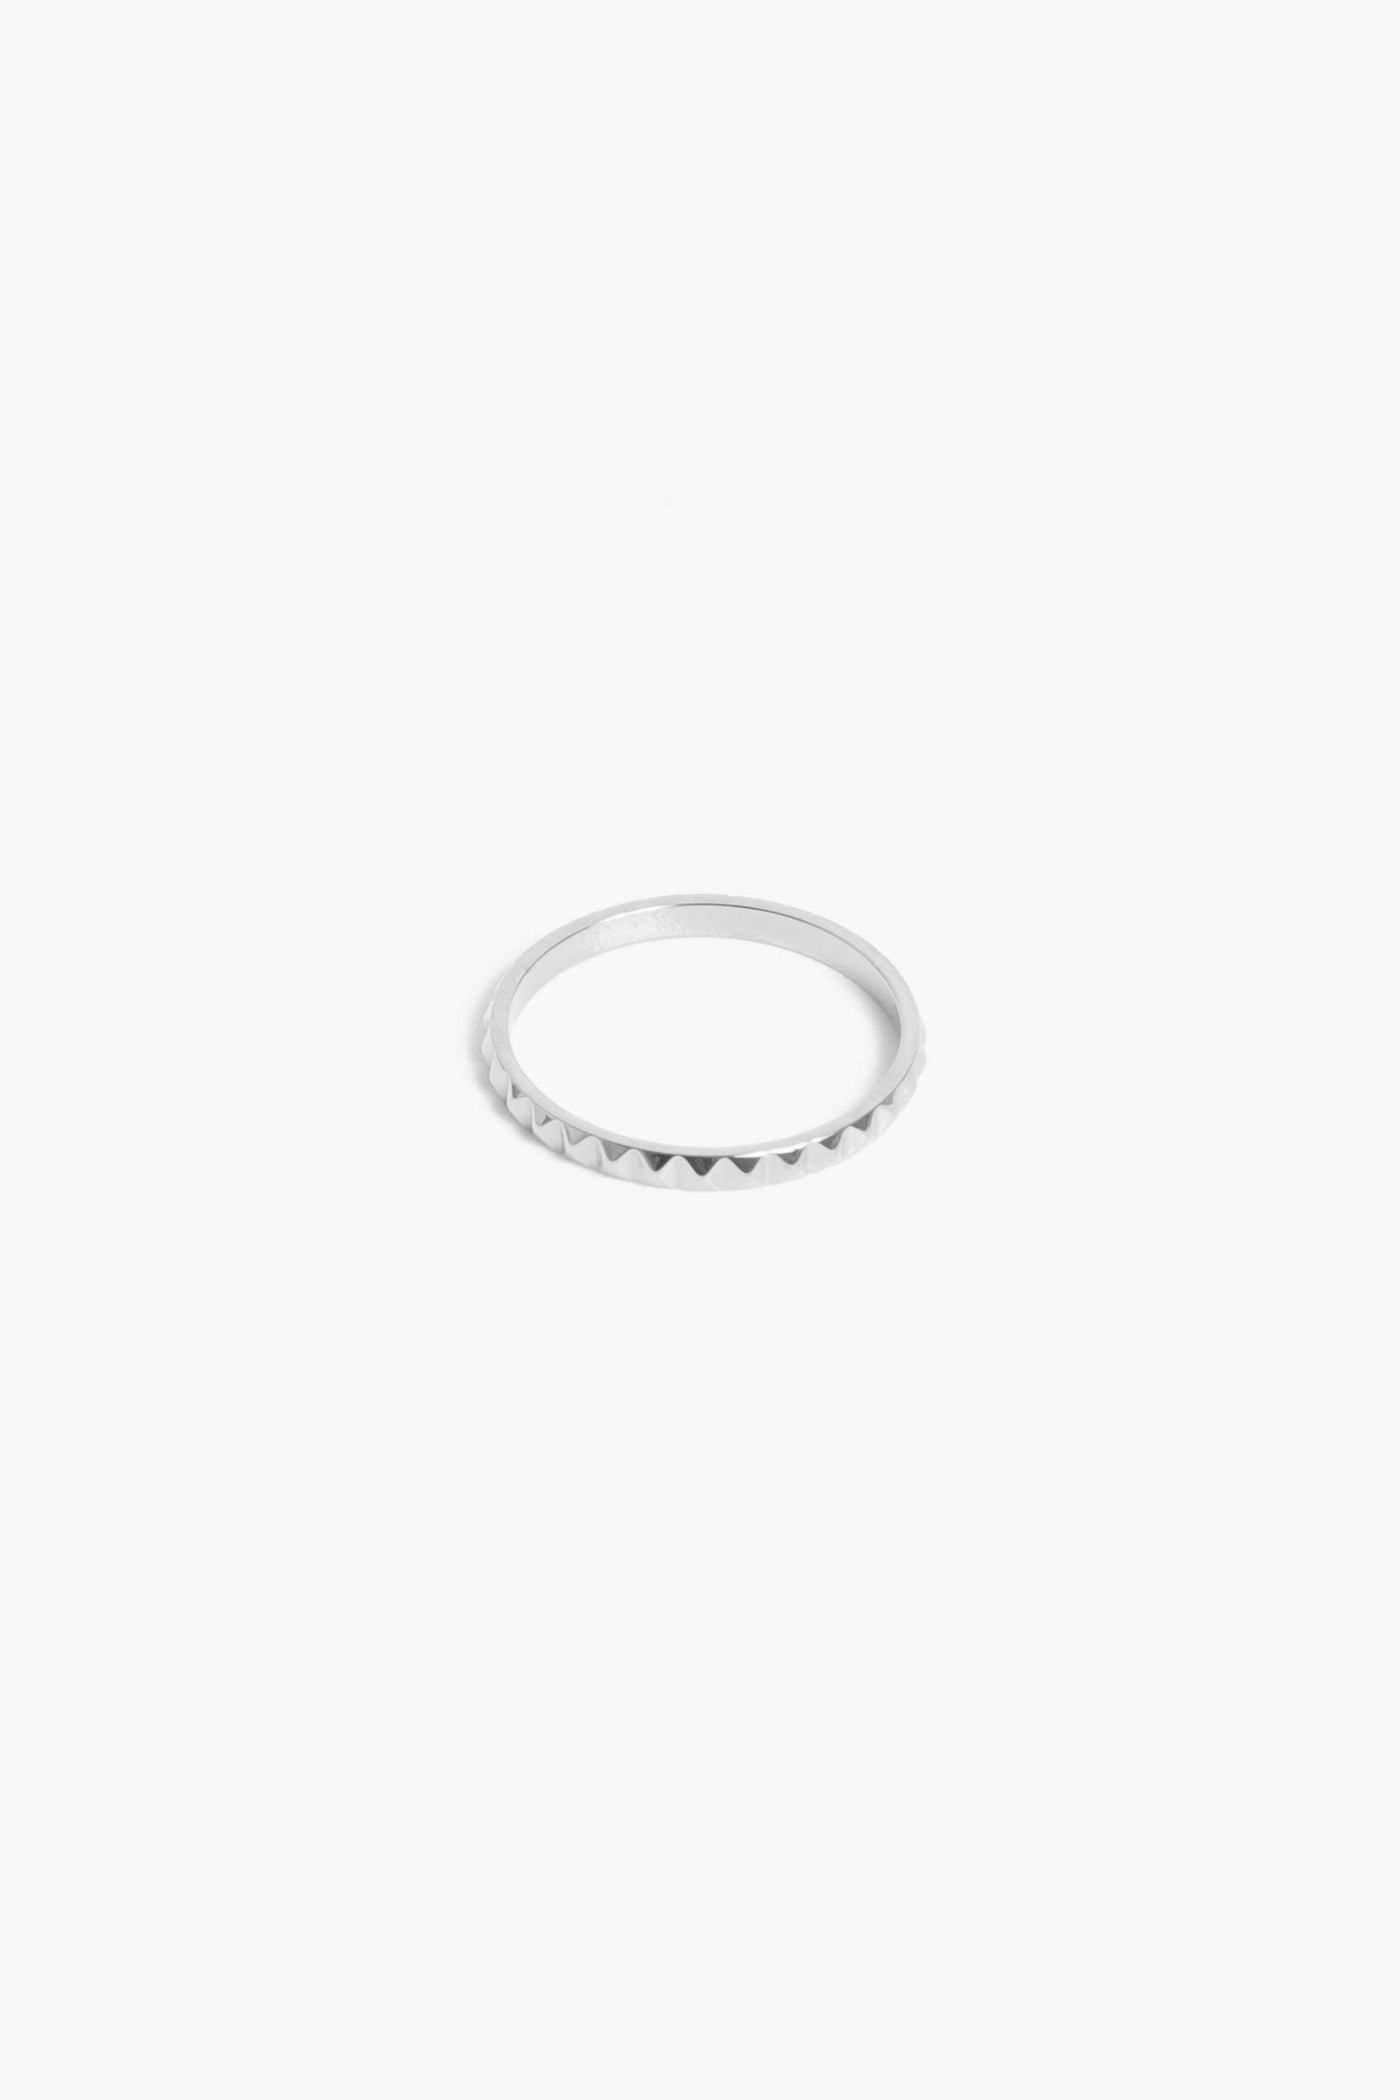 Marrin Costello Jewelry Melrose Band studded edgy stacking ring. Available in sizes 6, 7, 8. Waterproof, sustainable, hypoallergenic. Polished stainless steel.